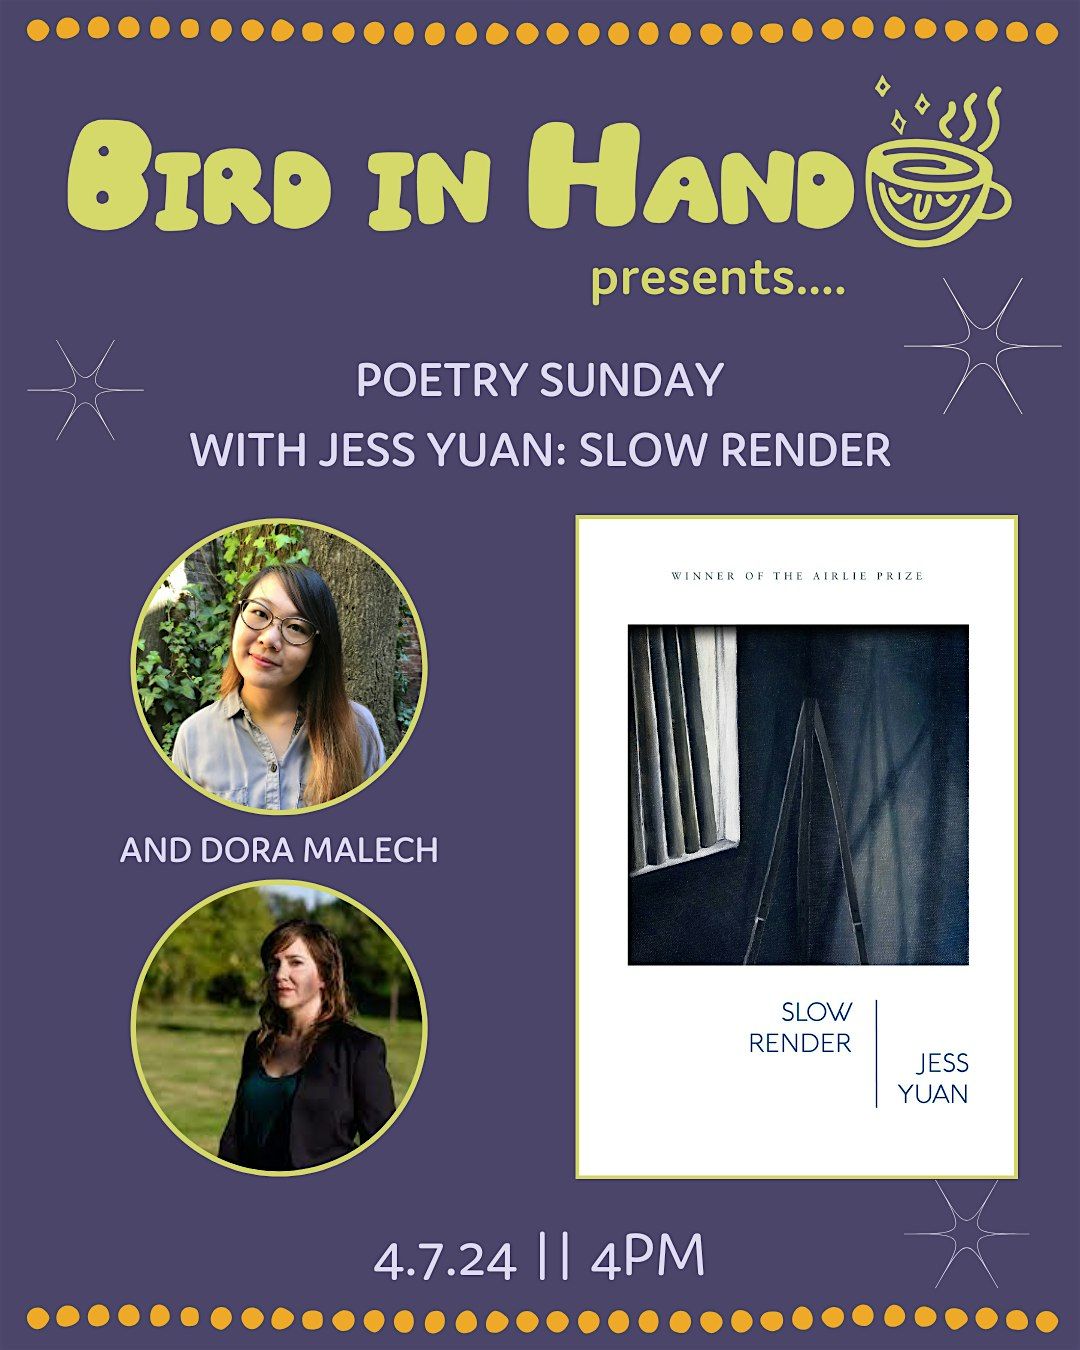 Poetry Sunday with Jess Yuan: SLOW RENDER (with Dora Malech)